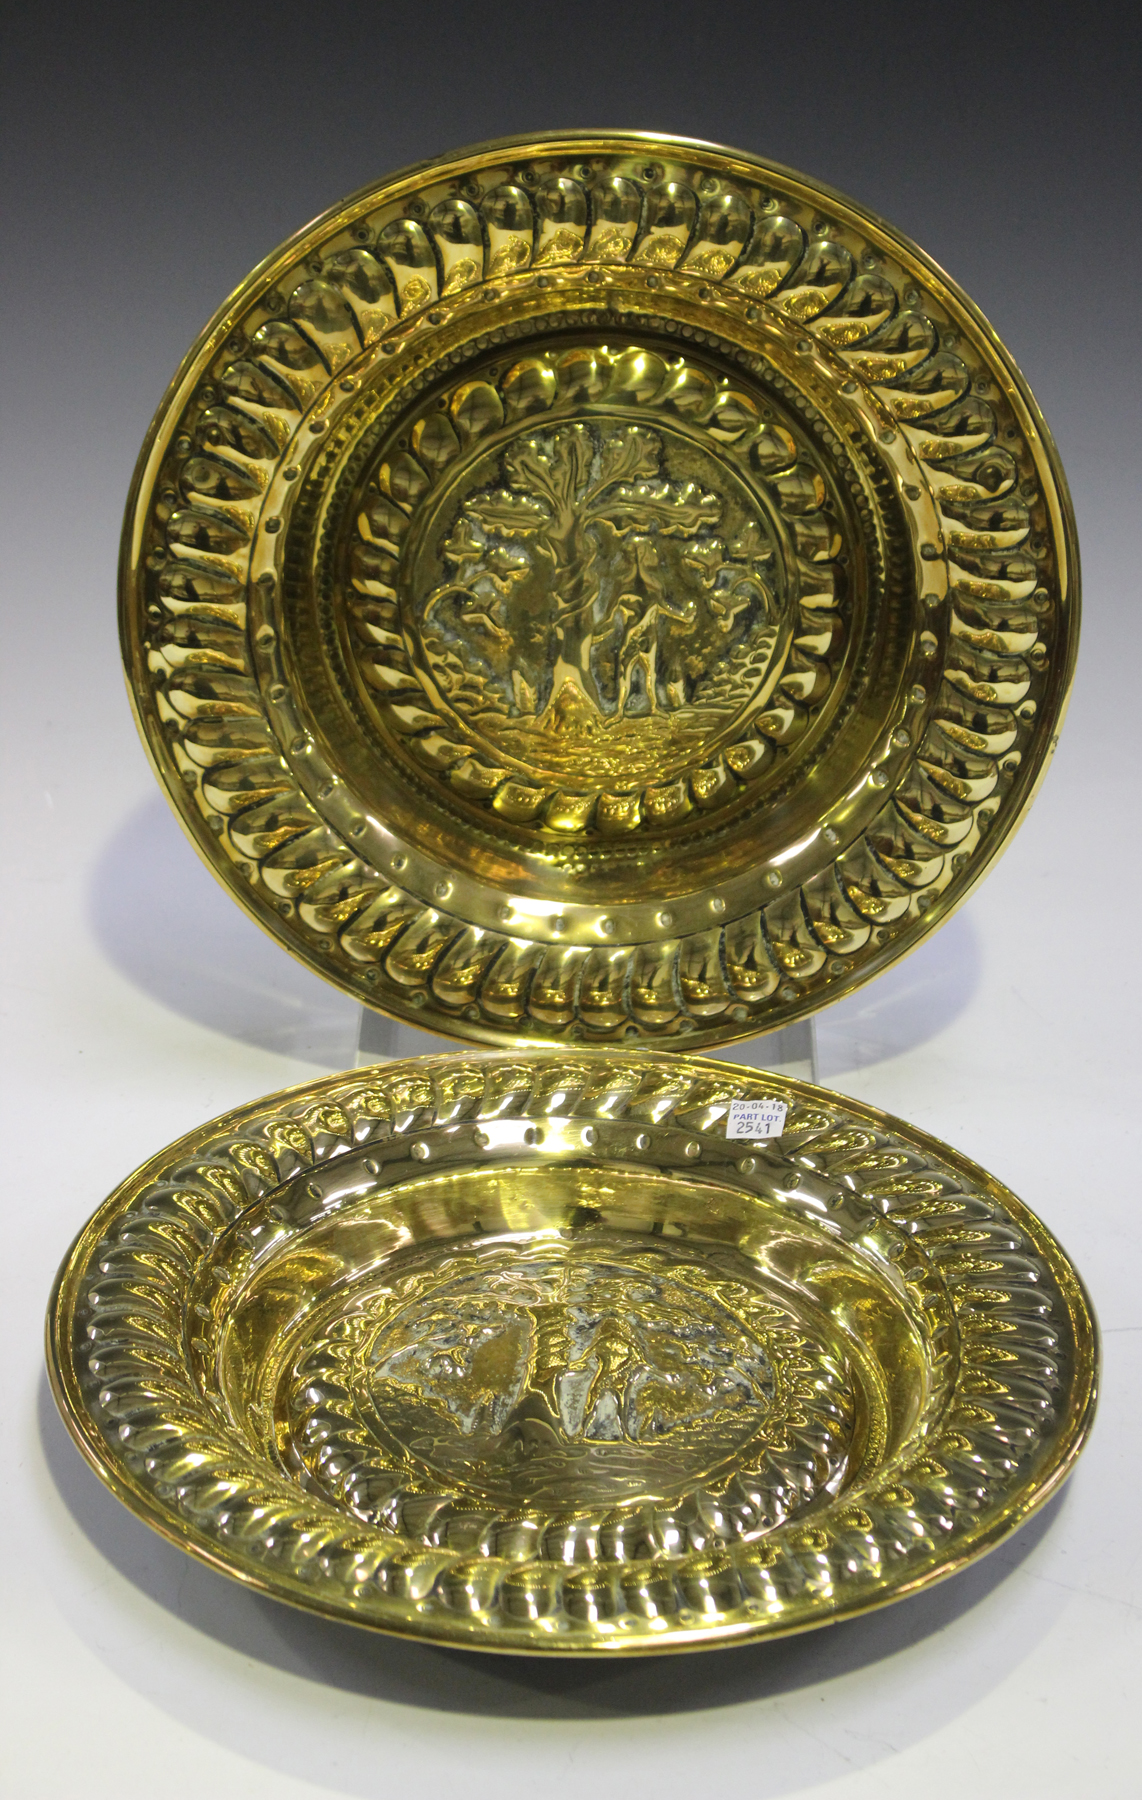 A pair of early 19th century Nuremberg style brass alms dishes, each decorated with Eve standing